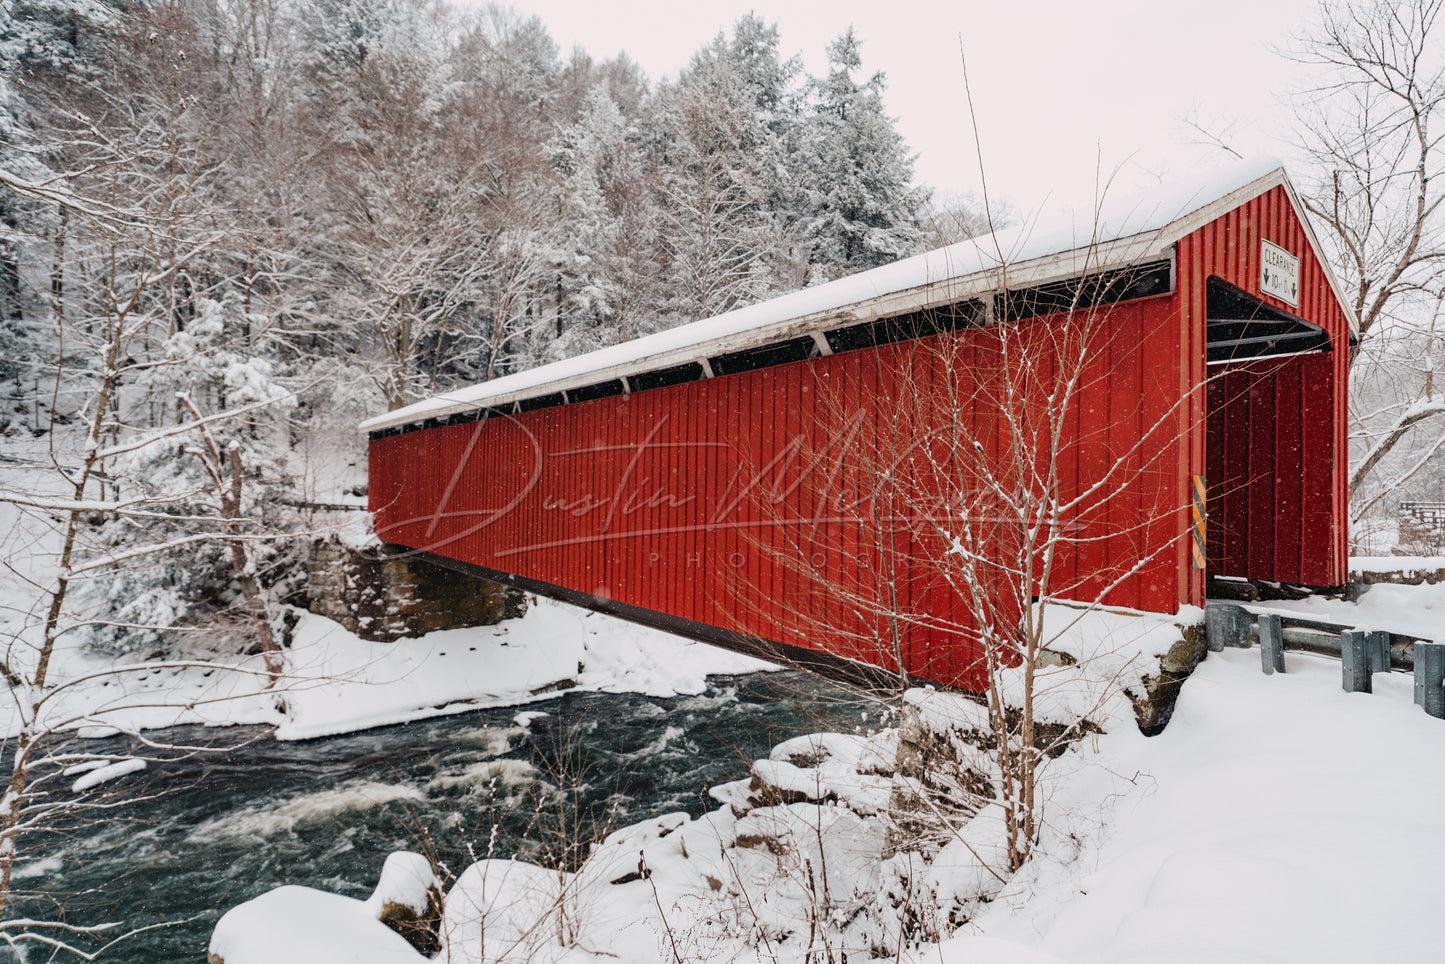 The Covered Bridge at McConnells Mill